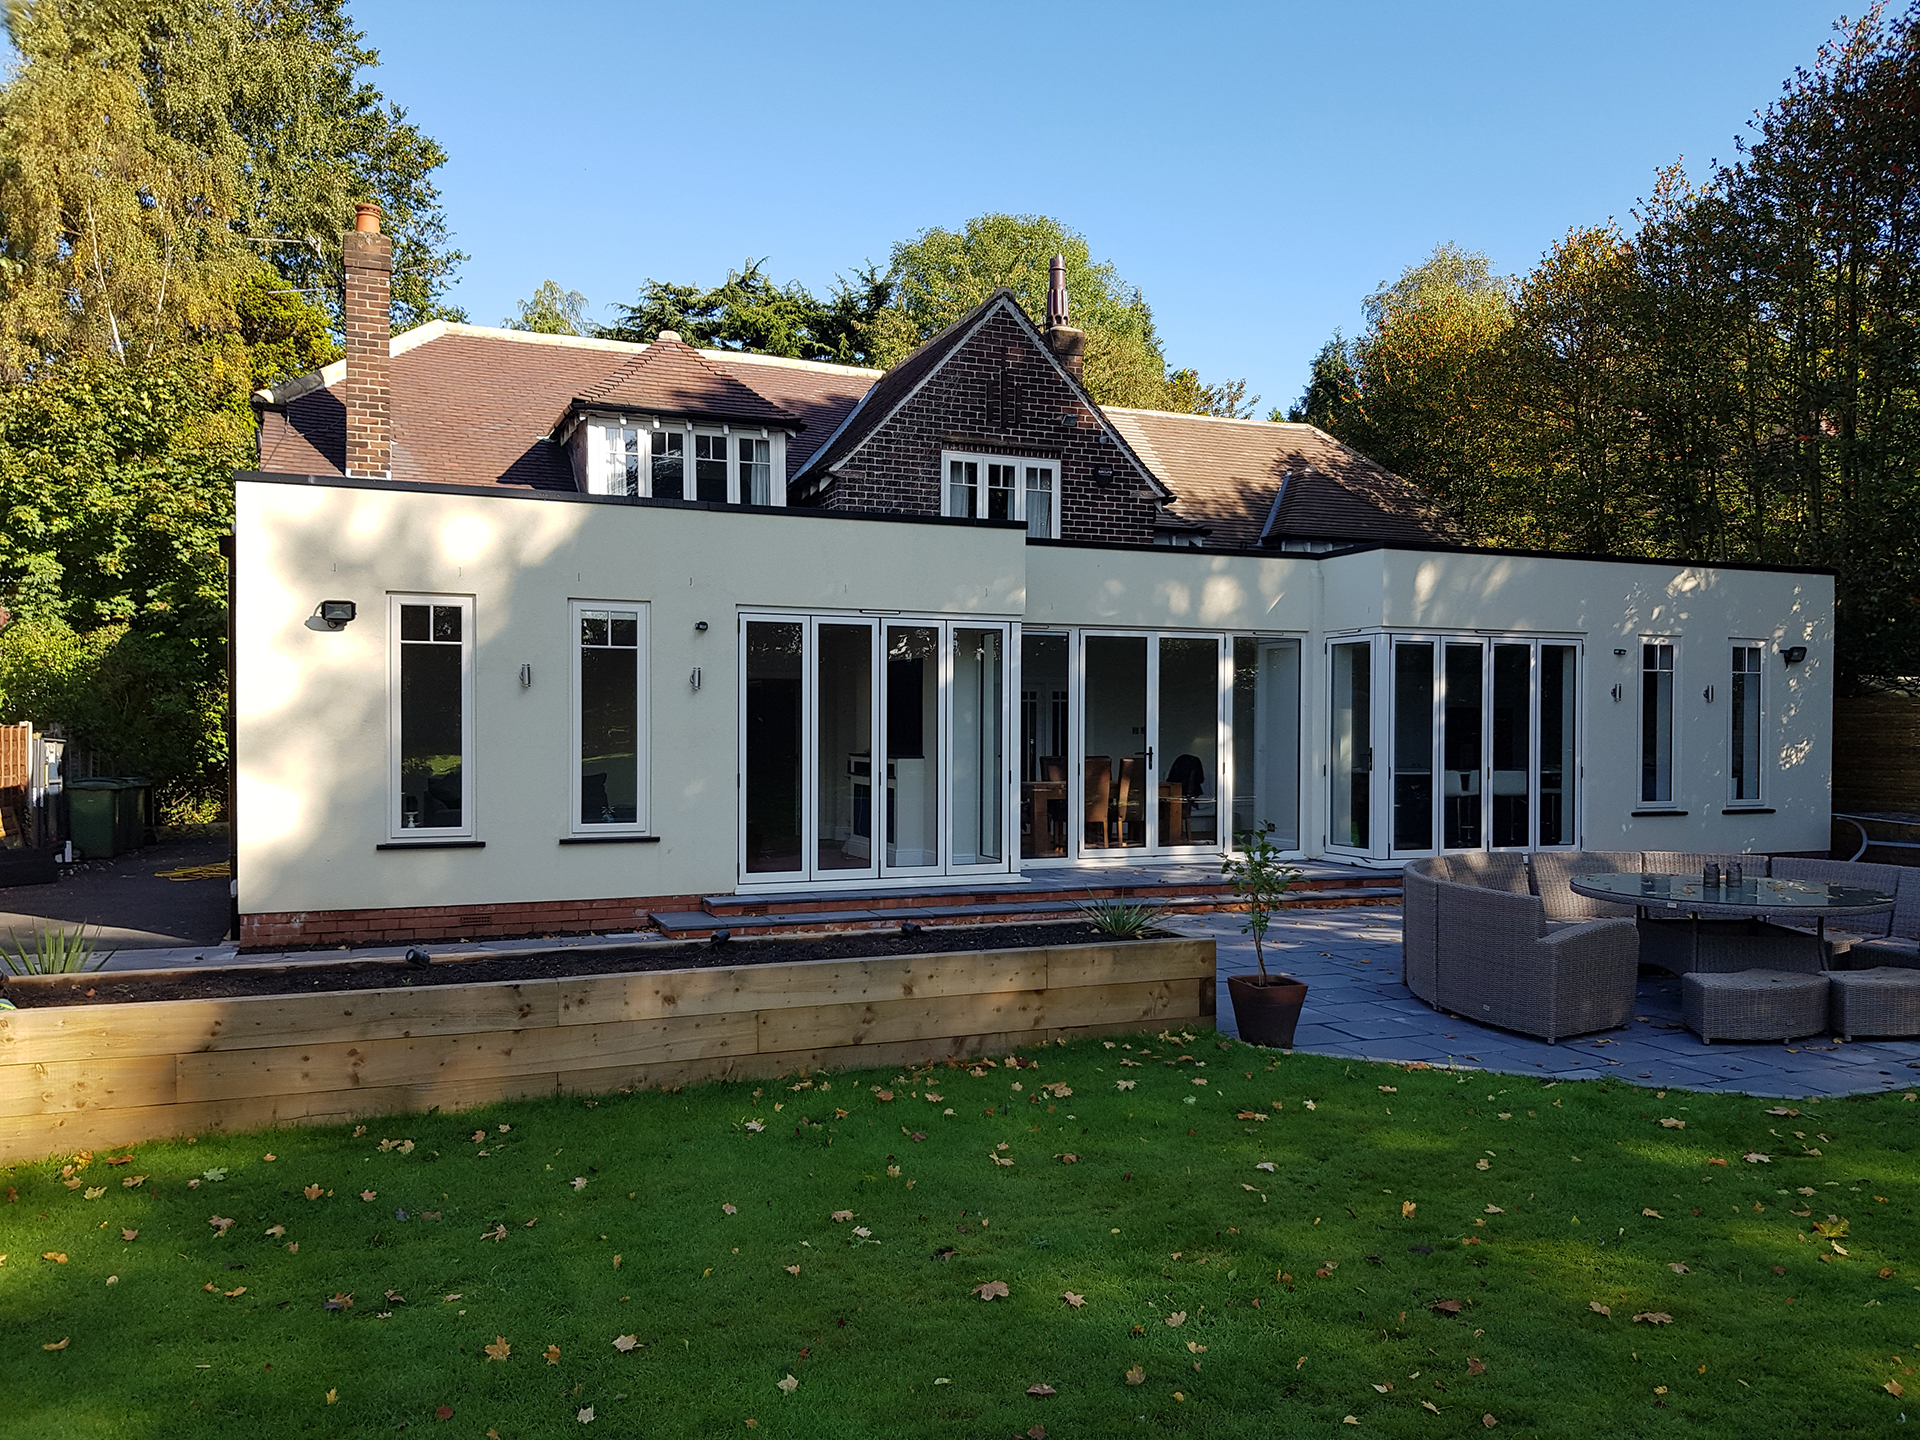 Remodelling and extension of a residential house in South Manchester